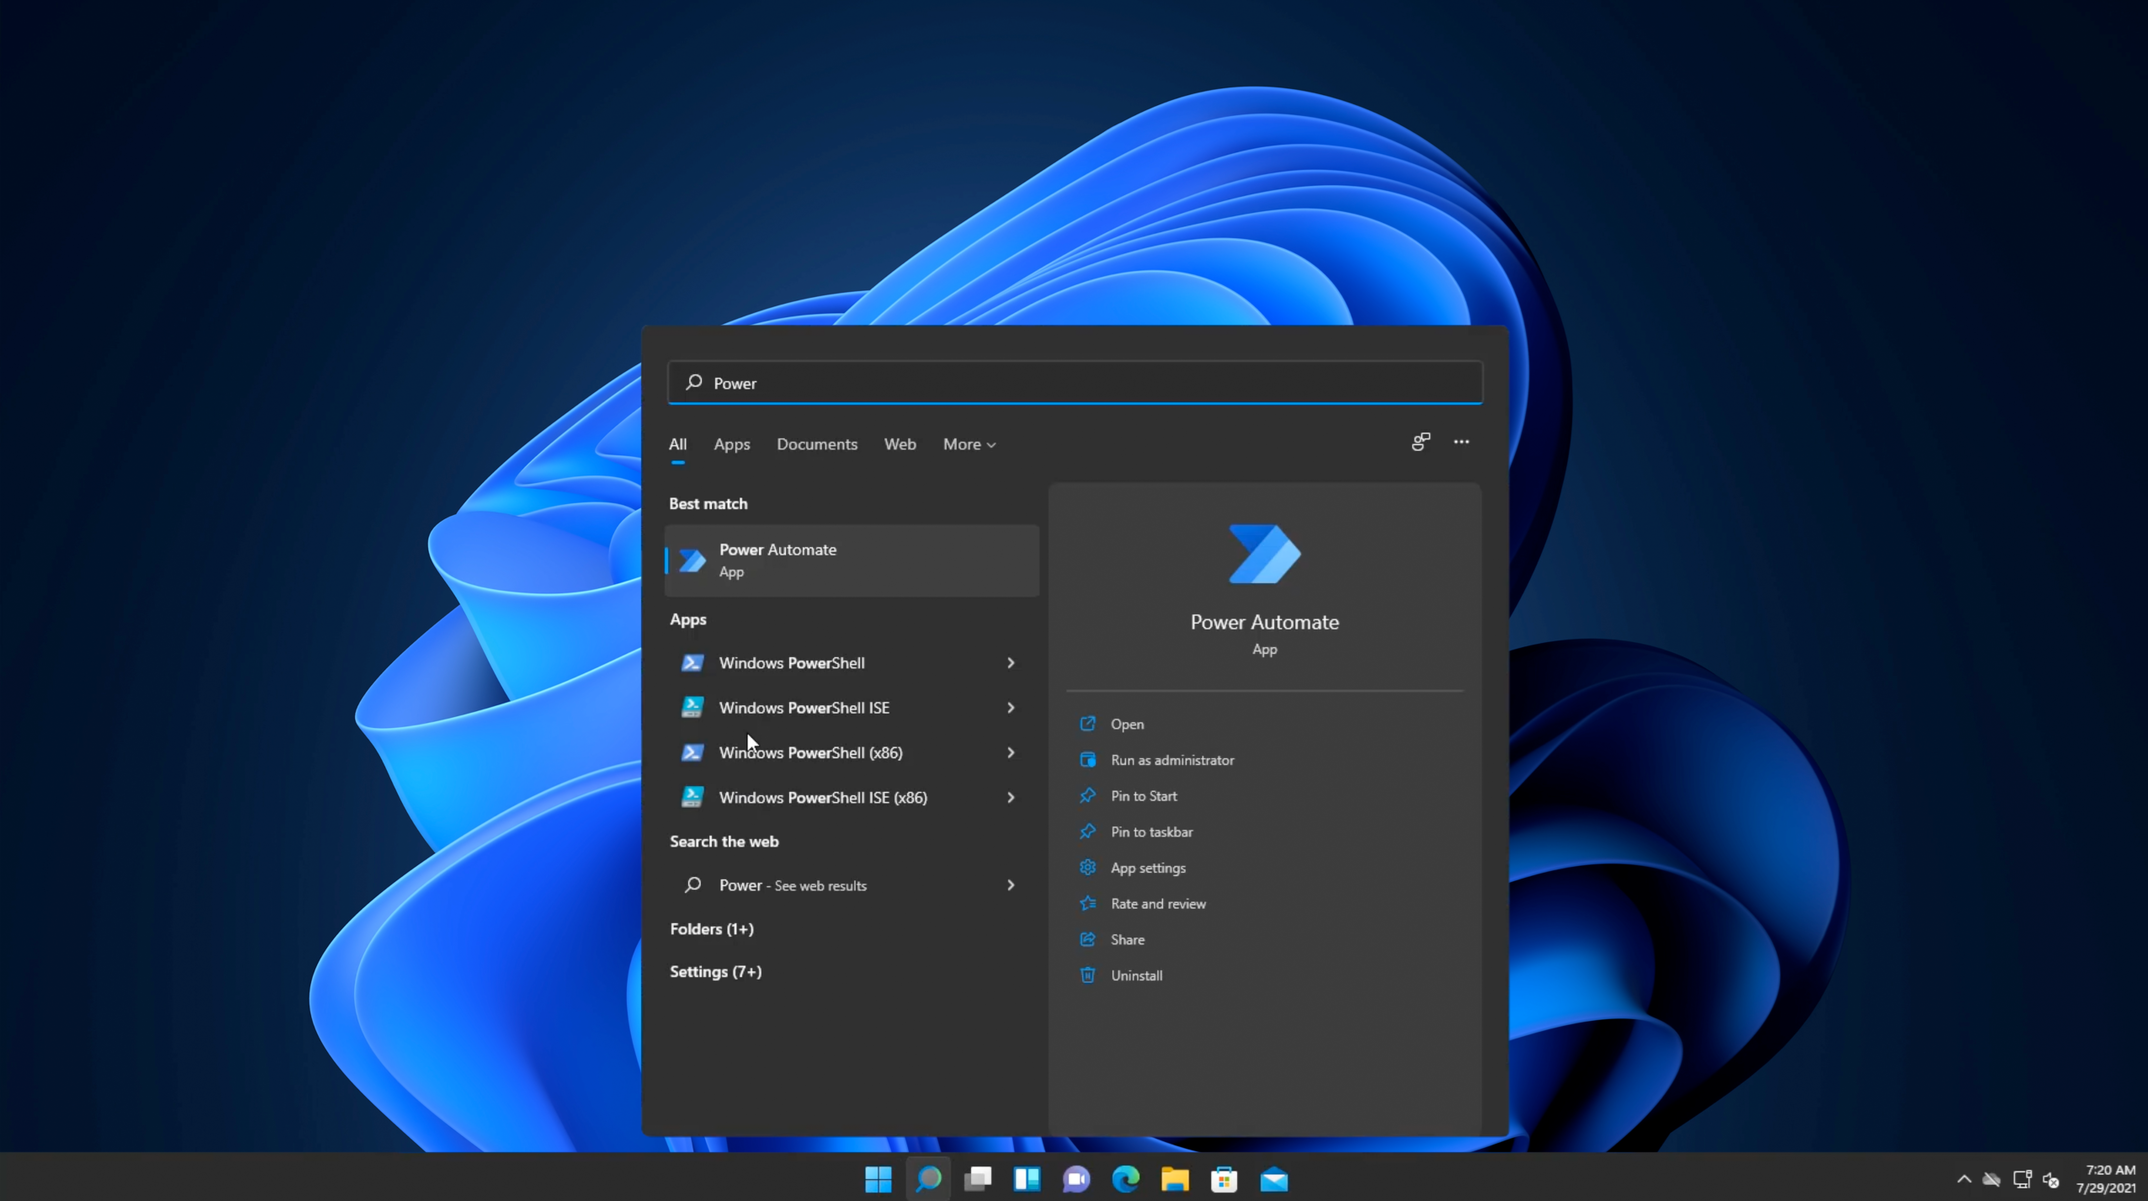 Power Automate is available right from Windows 11. You can search for the app in the start menu to start automating.